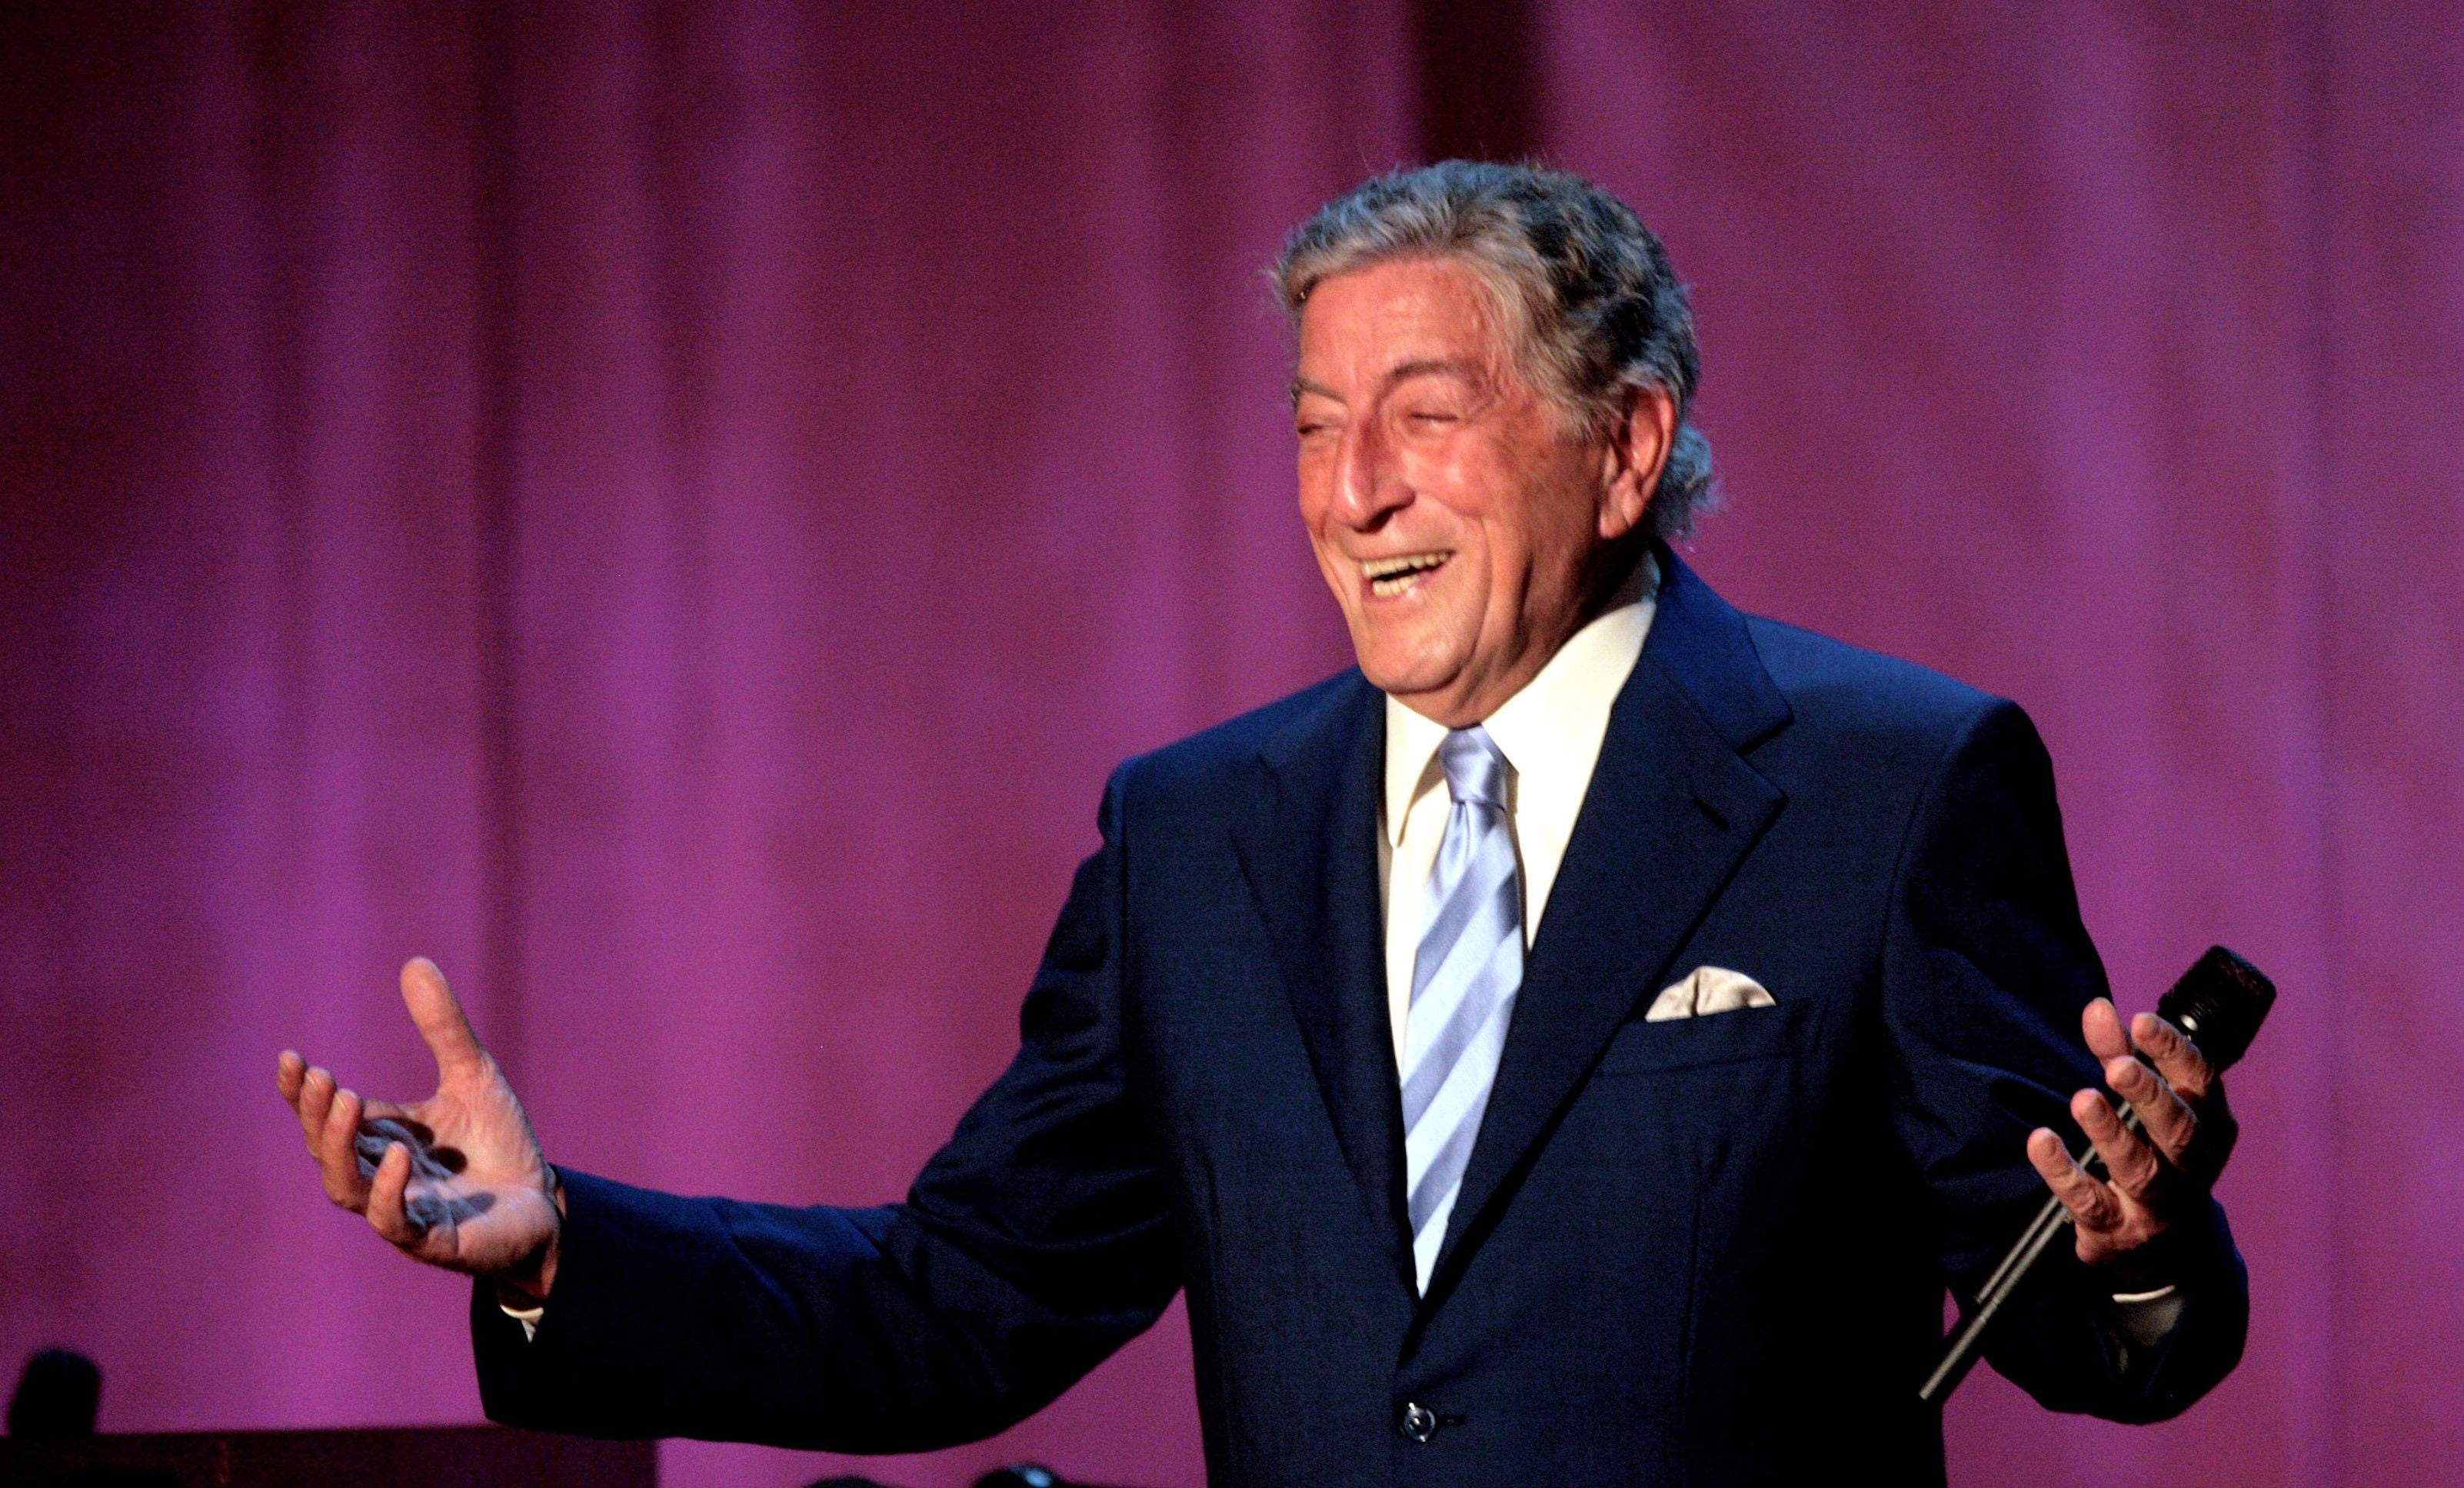 Tony Bennett performed on the Pyramid Stage at Glastonbury in 1998